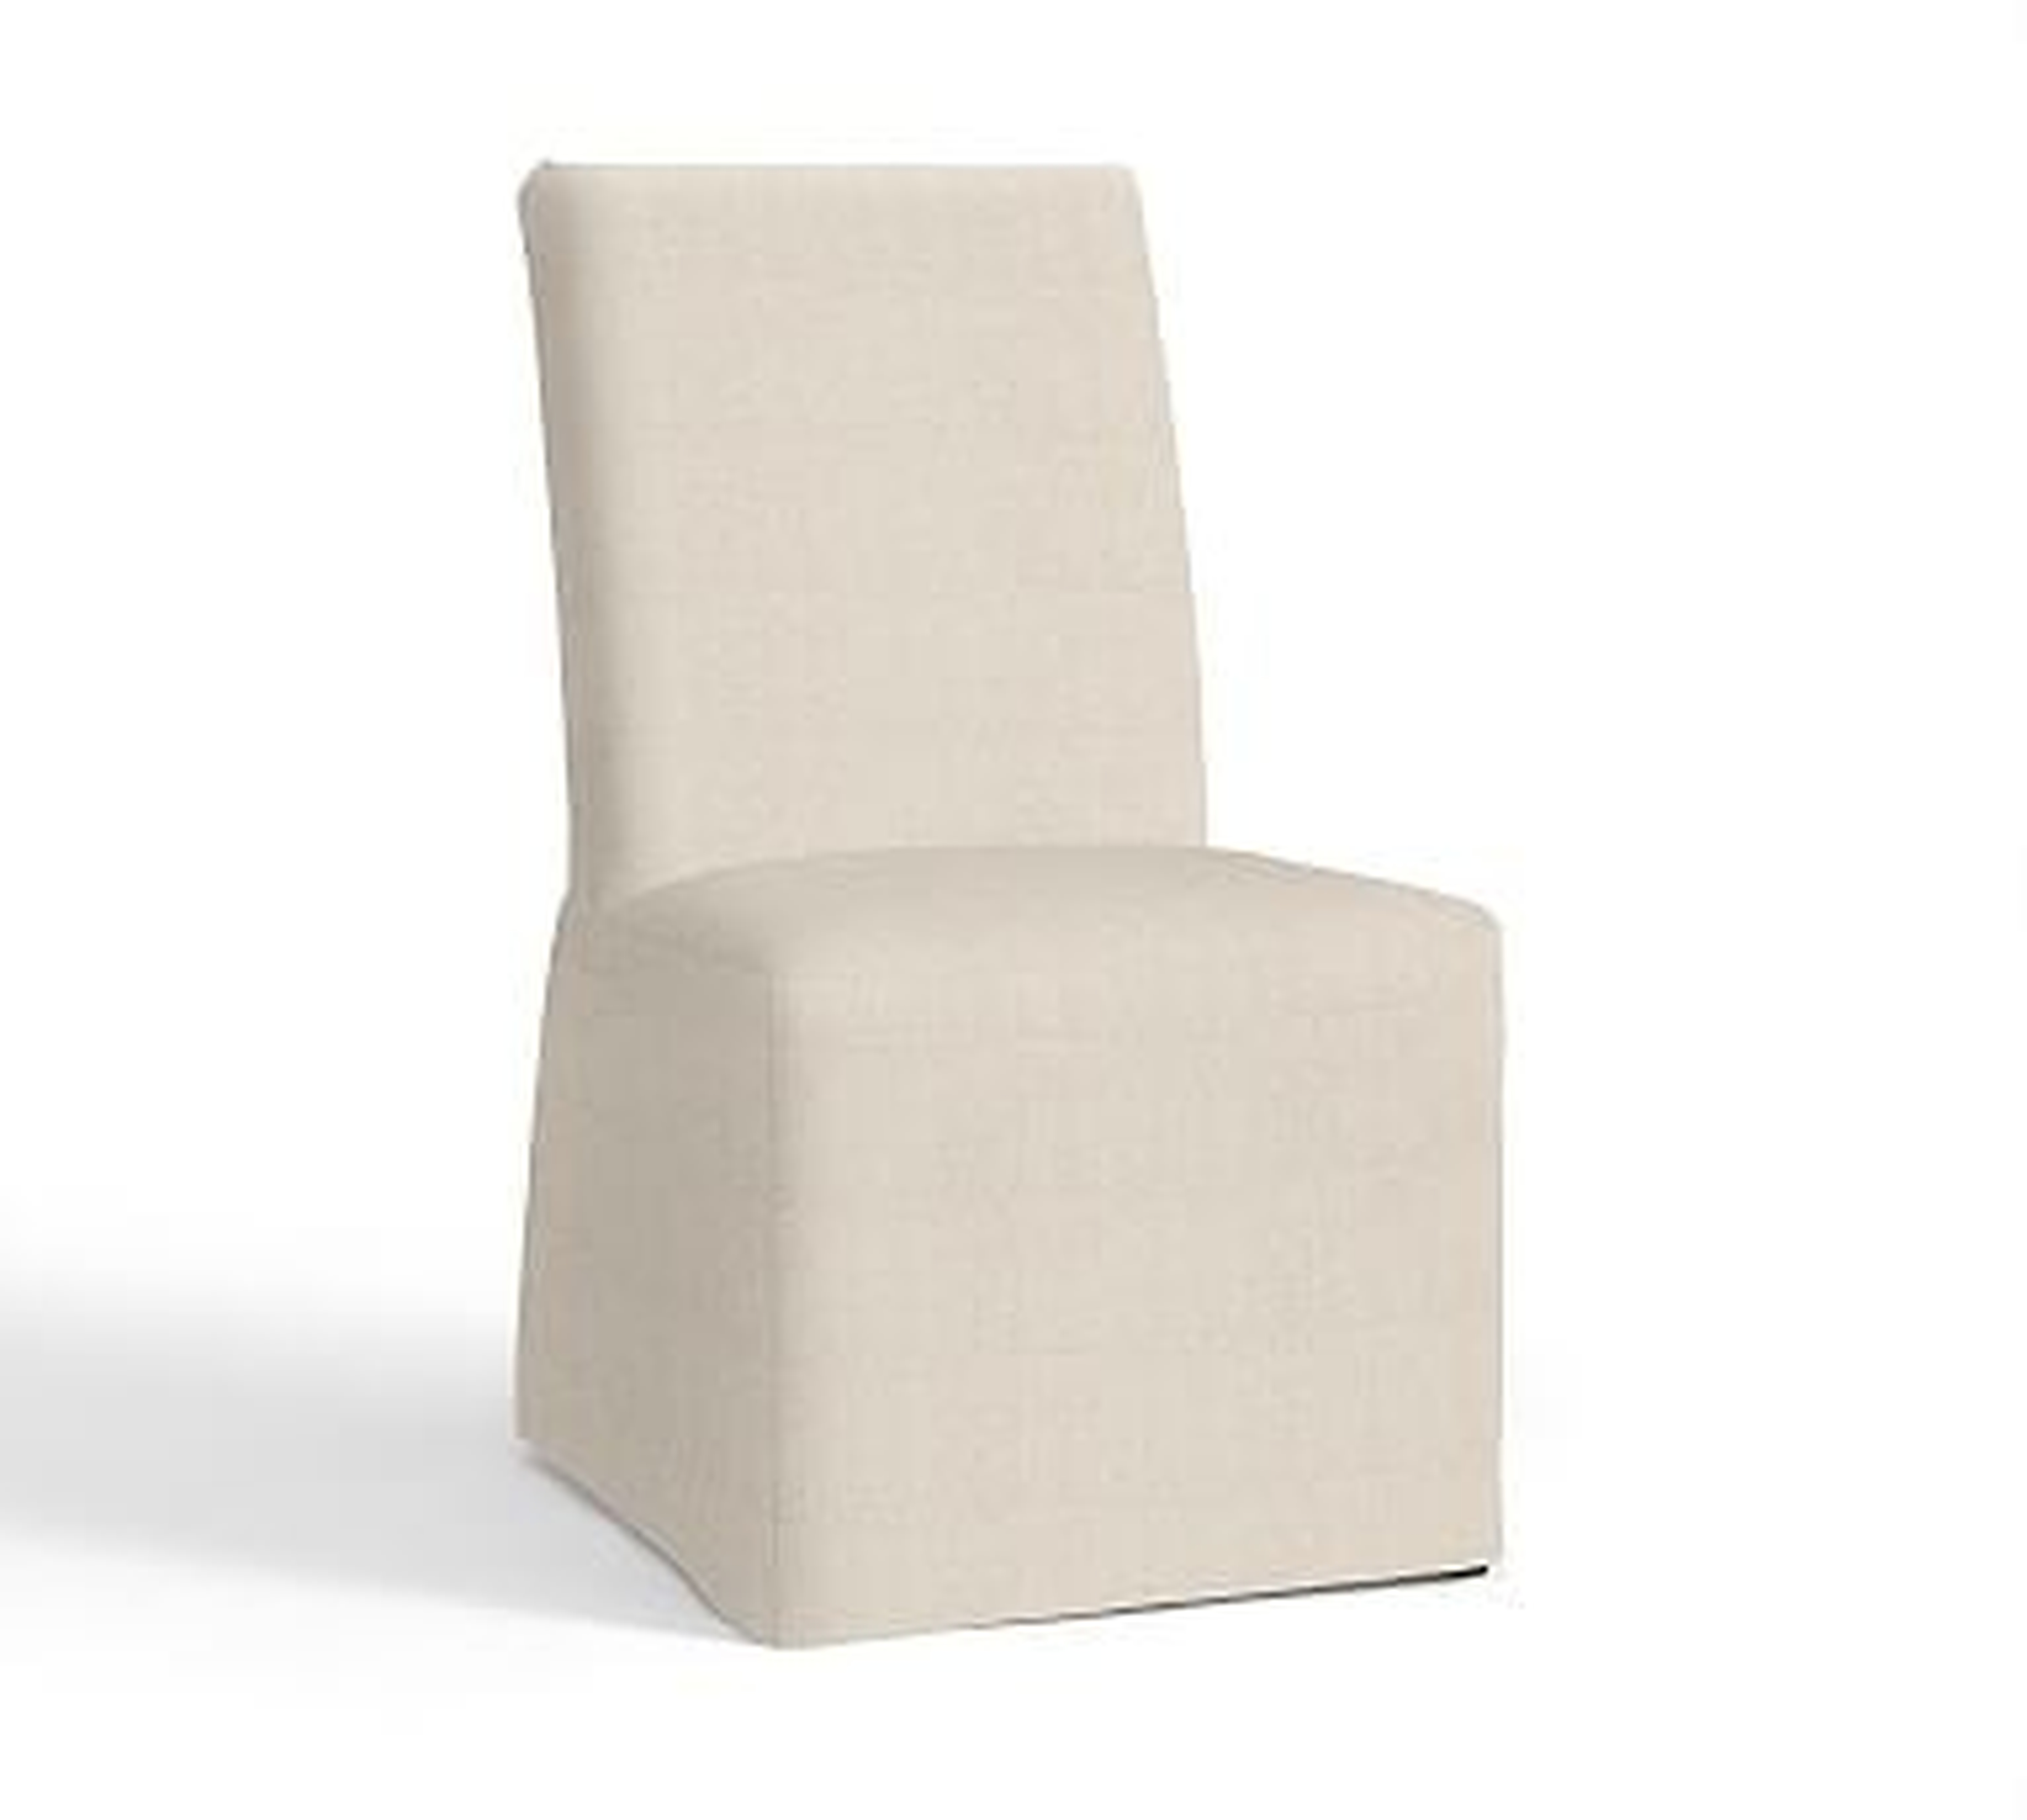 PB Comfort Square Long Slipcovered Dining Side Chair, Performance Everydaylinen(TM) Oatmeal - Pottery Barn